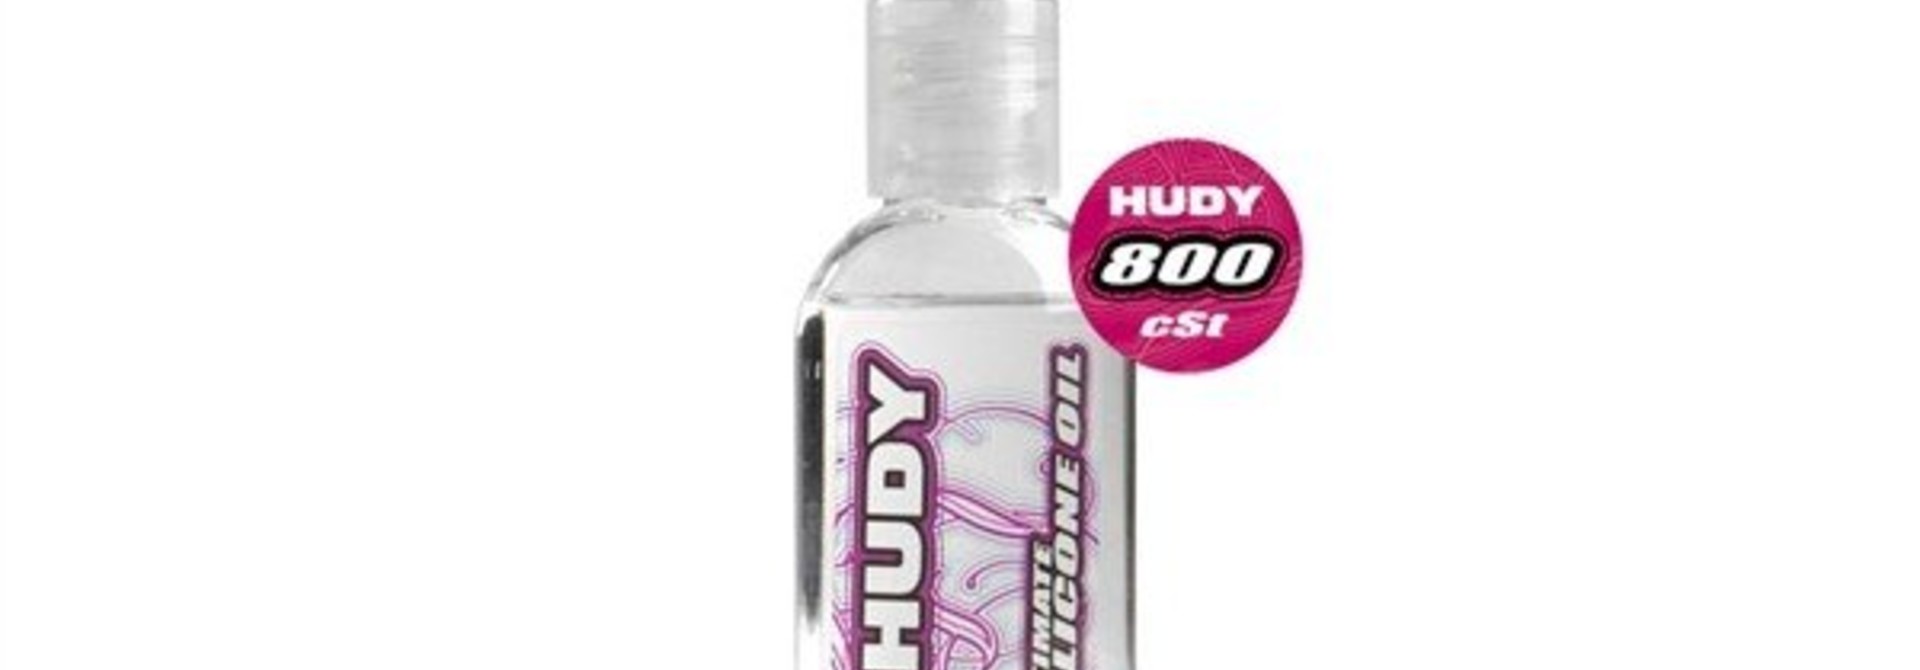 HUDY ULTIMATE SILICONE OIL 800 cSt - 50ML. H106380